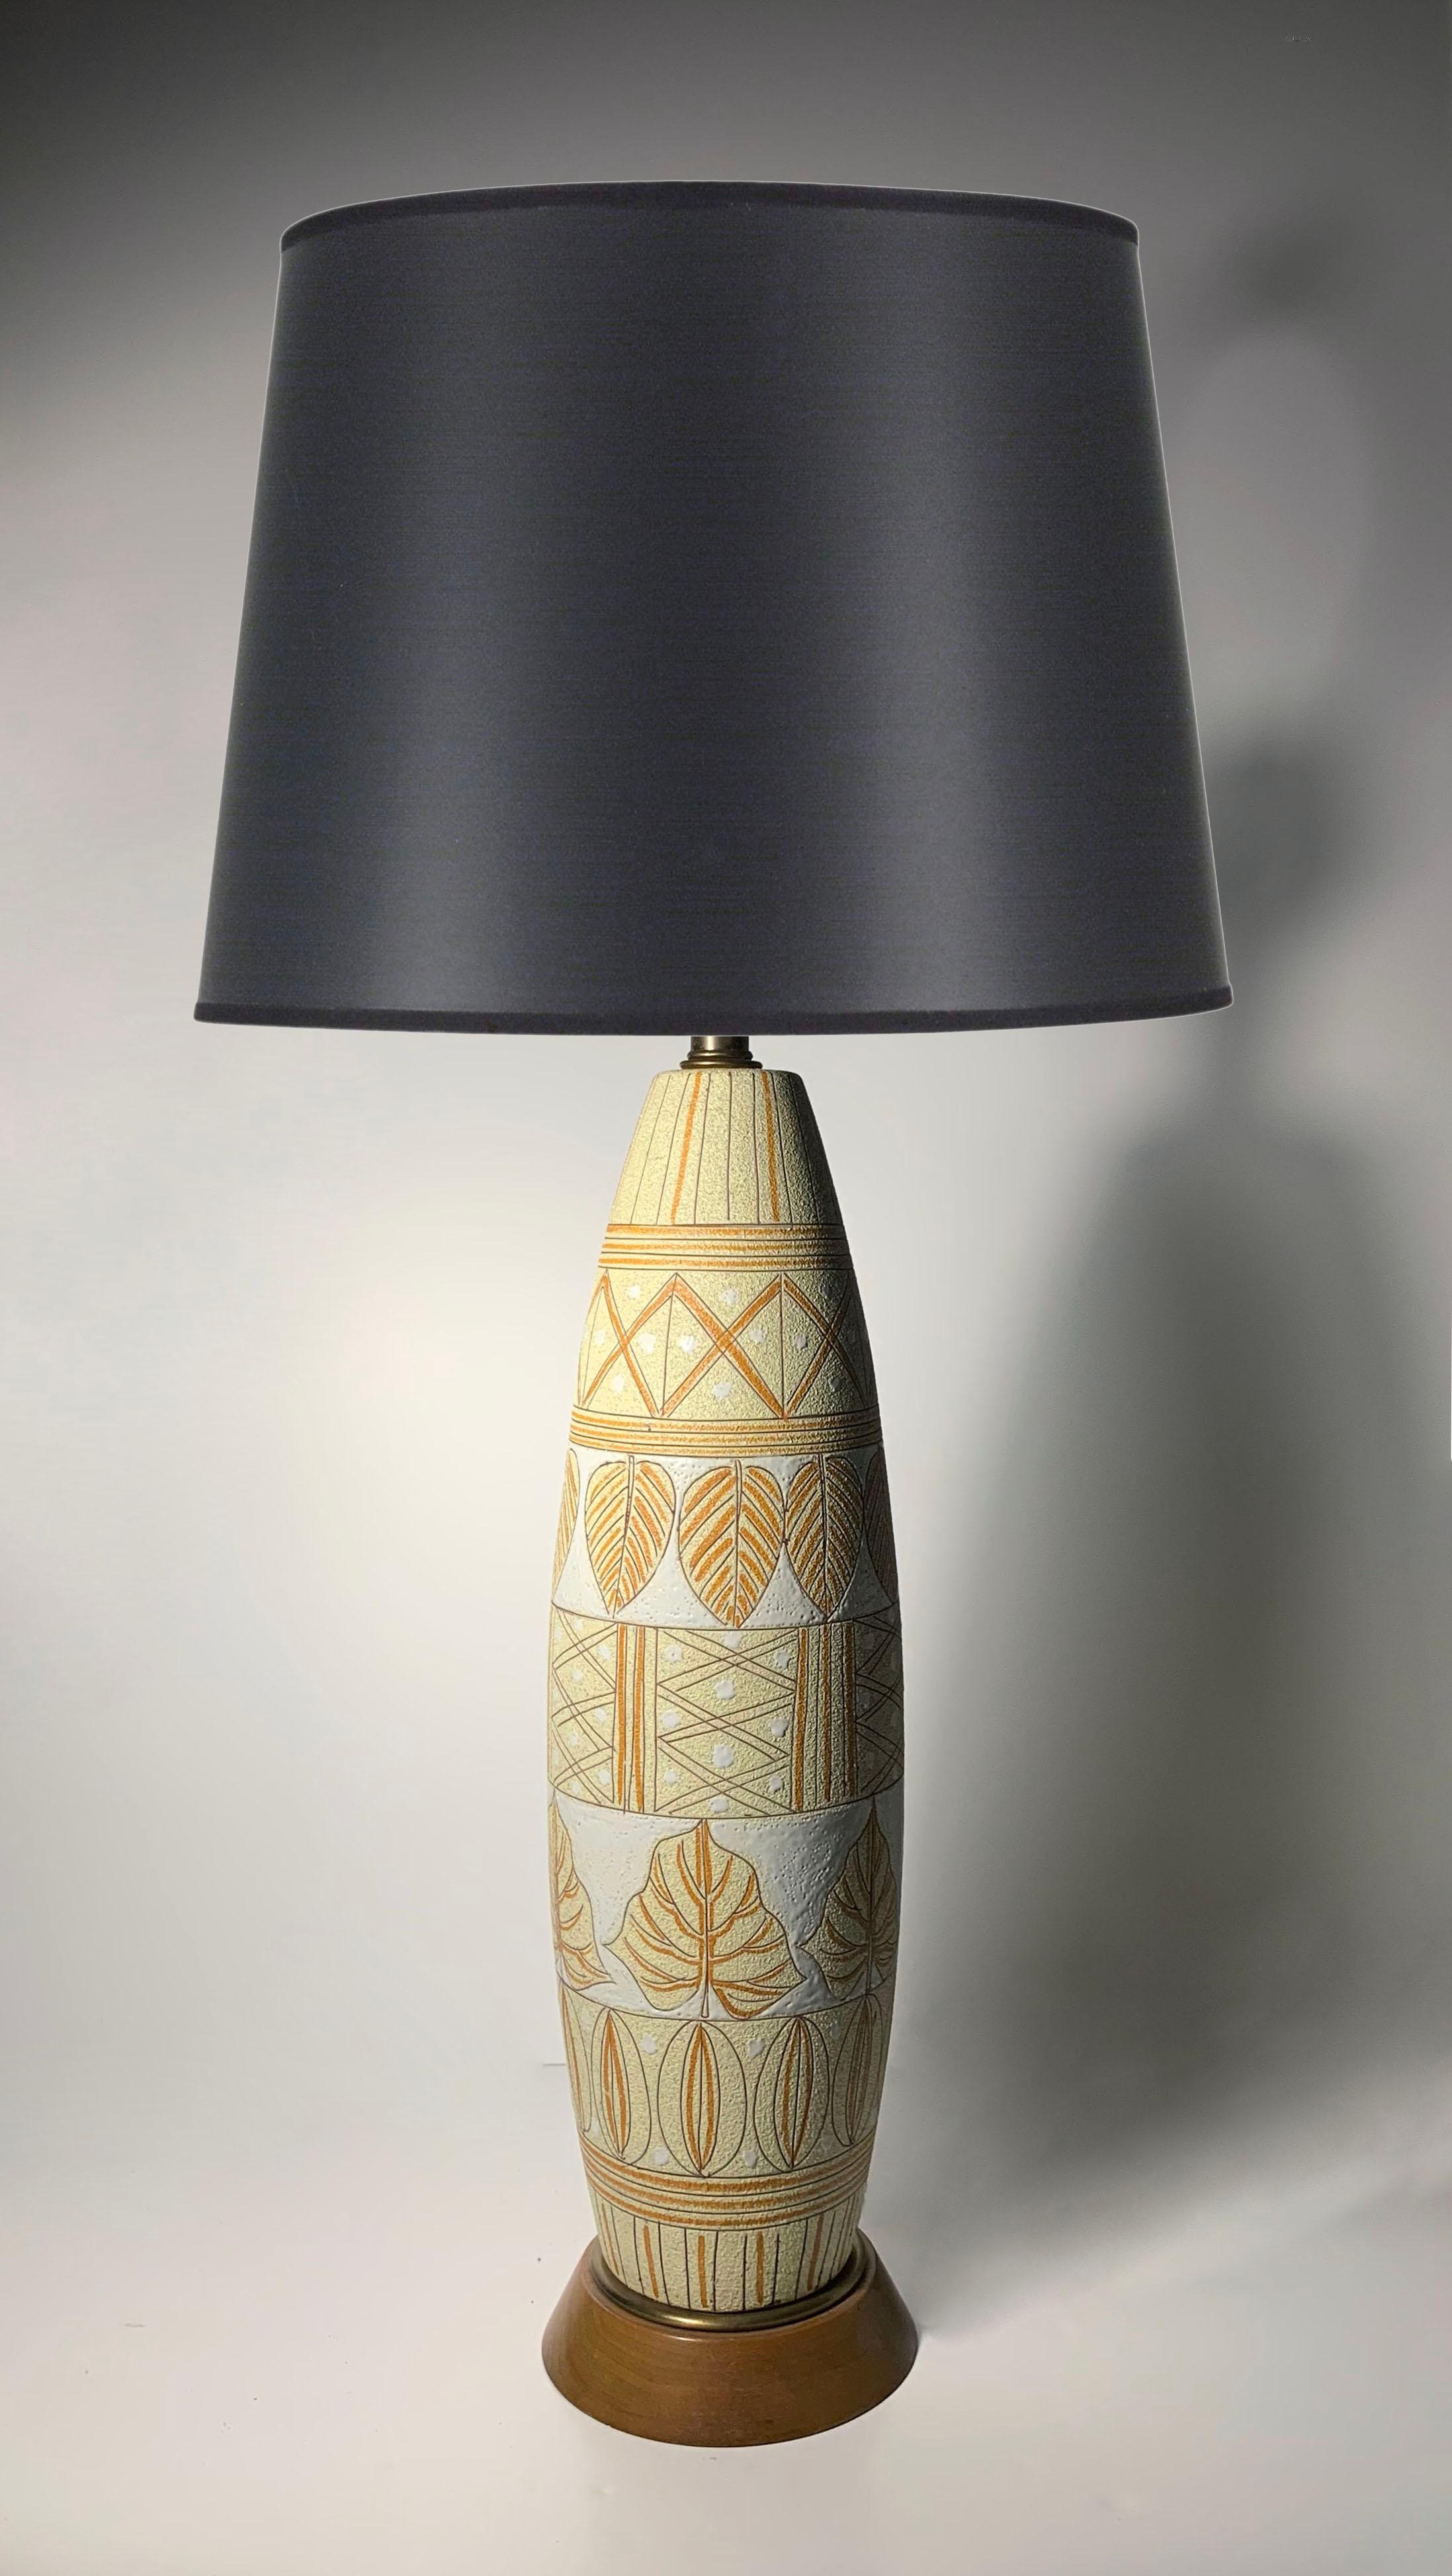 Fratelli Fanciullacci Ceramic Lamp for Raymor

Manner of Marcello Fantoni

Black Shade not included.
Height is to top of finial in picture without the shade.